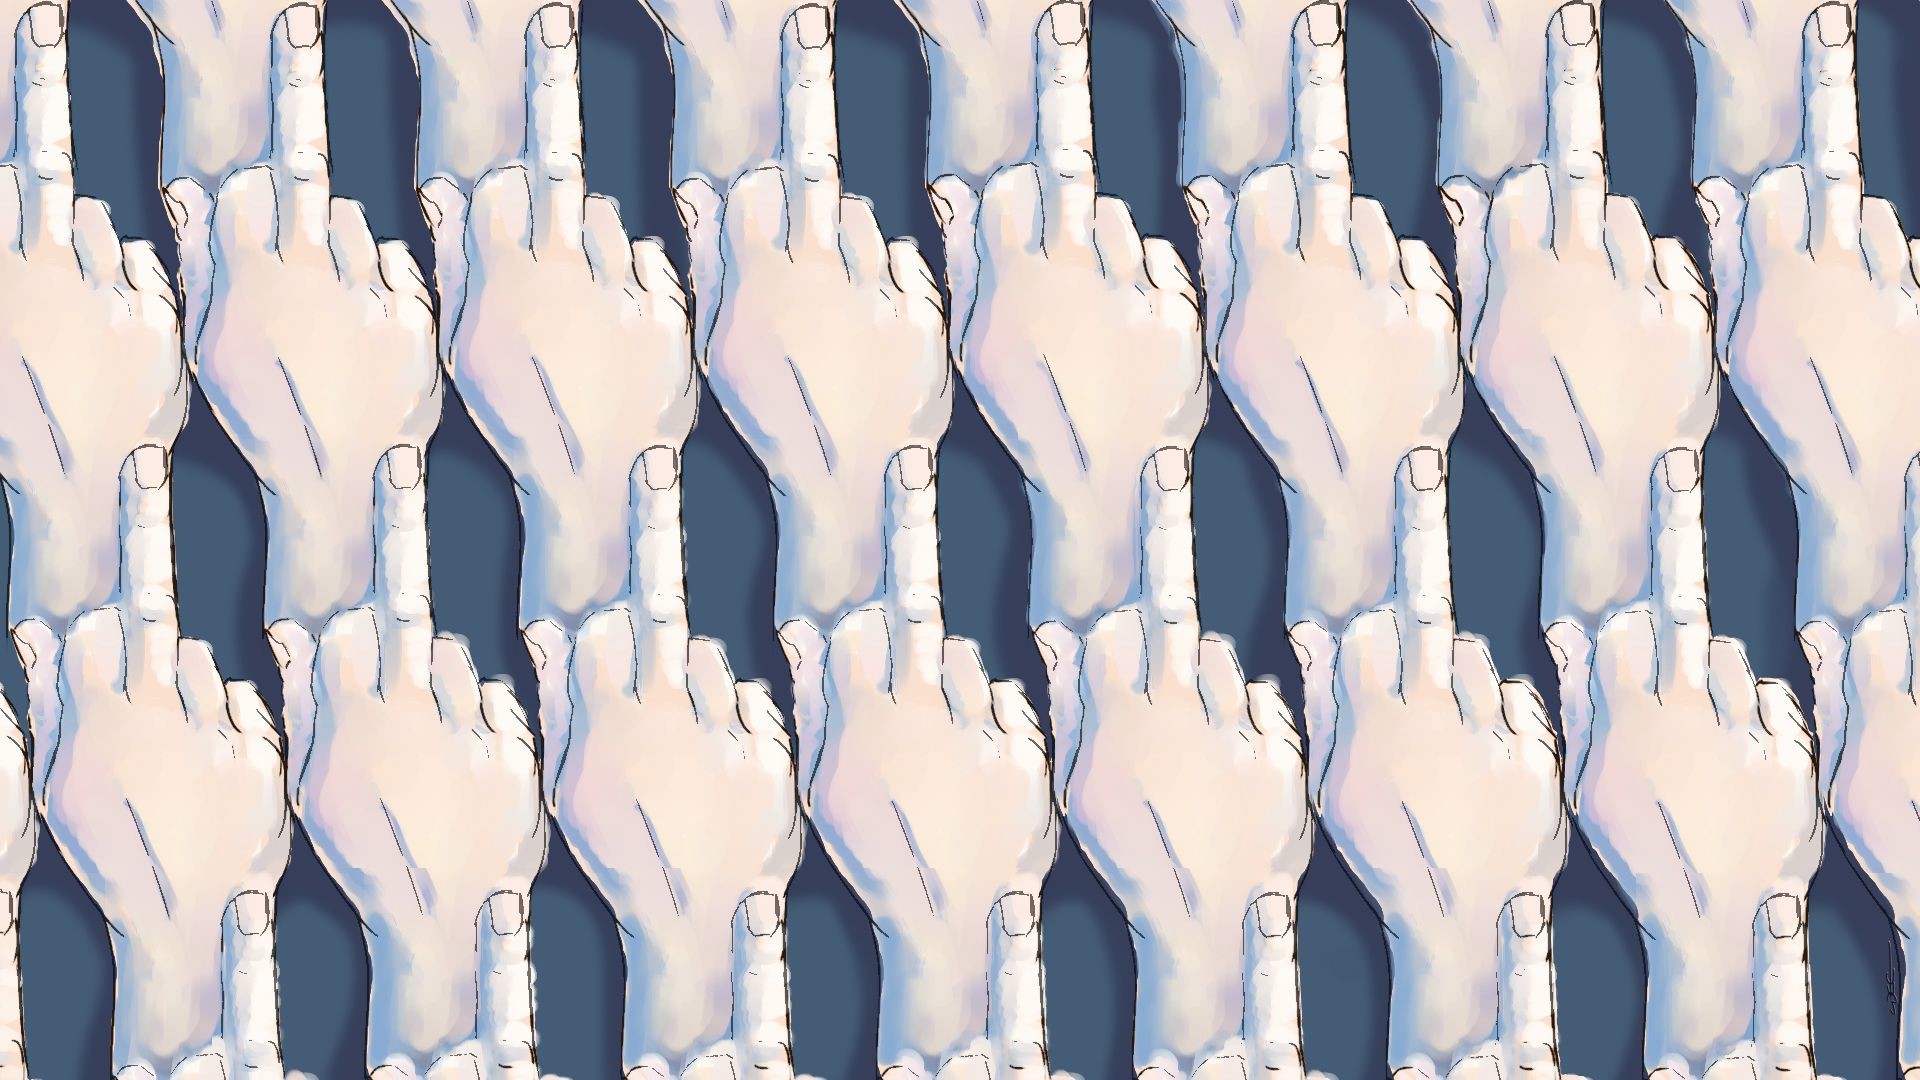 1920x1080 ... Wallpaper for the self-loathing misanthrope by Wee-Froggy